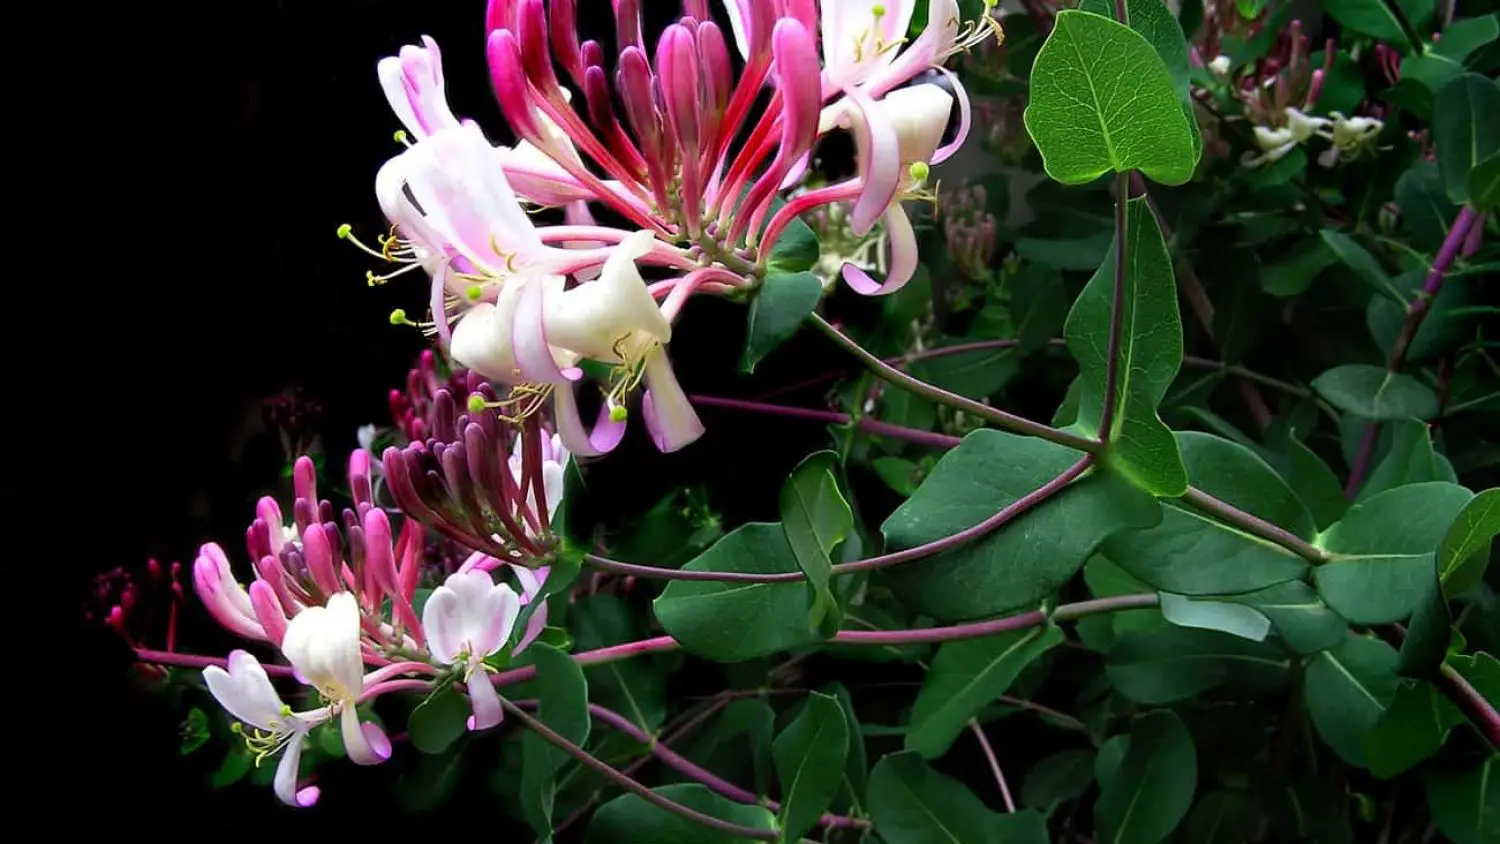 Muicle (Honeysuckle)-10 Great Health Benefits You Should Know